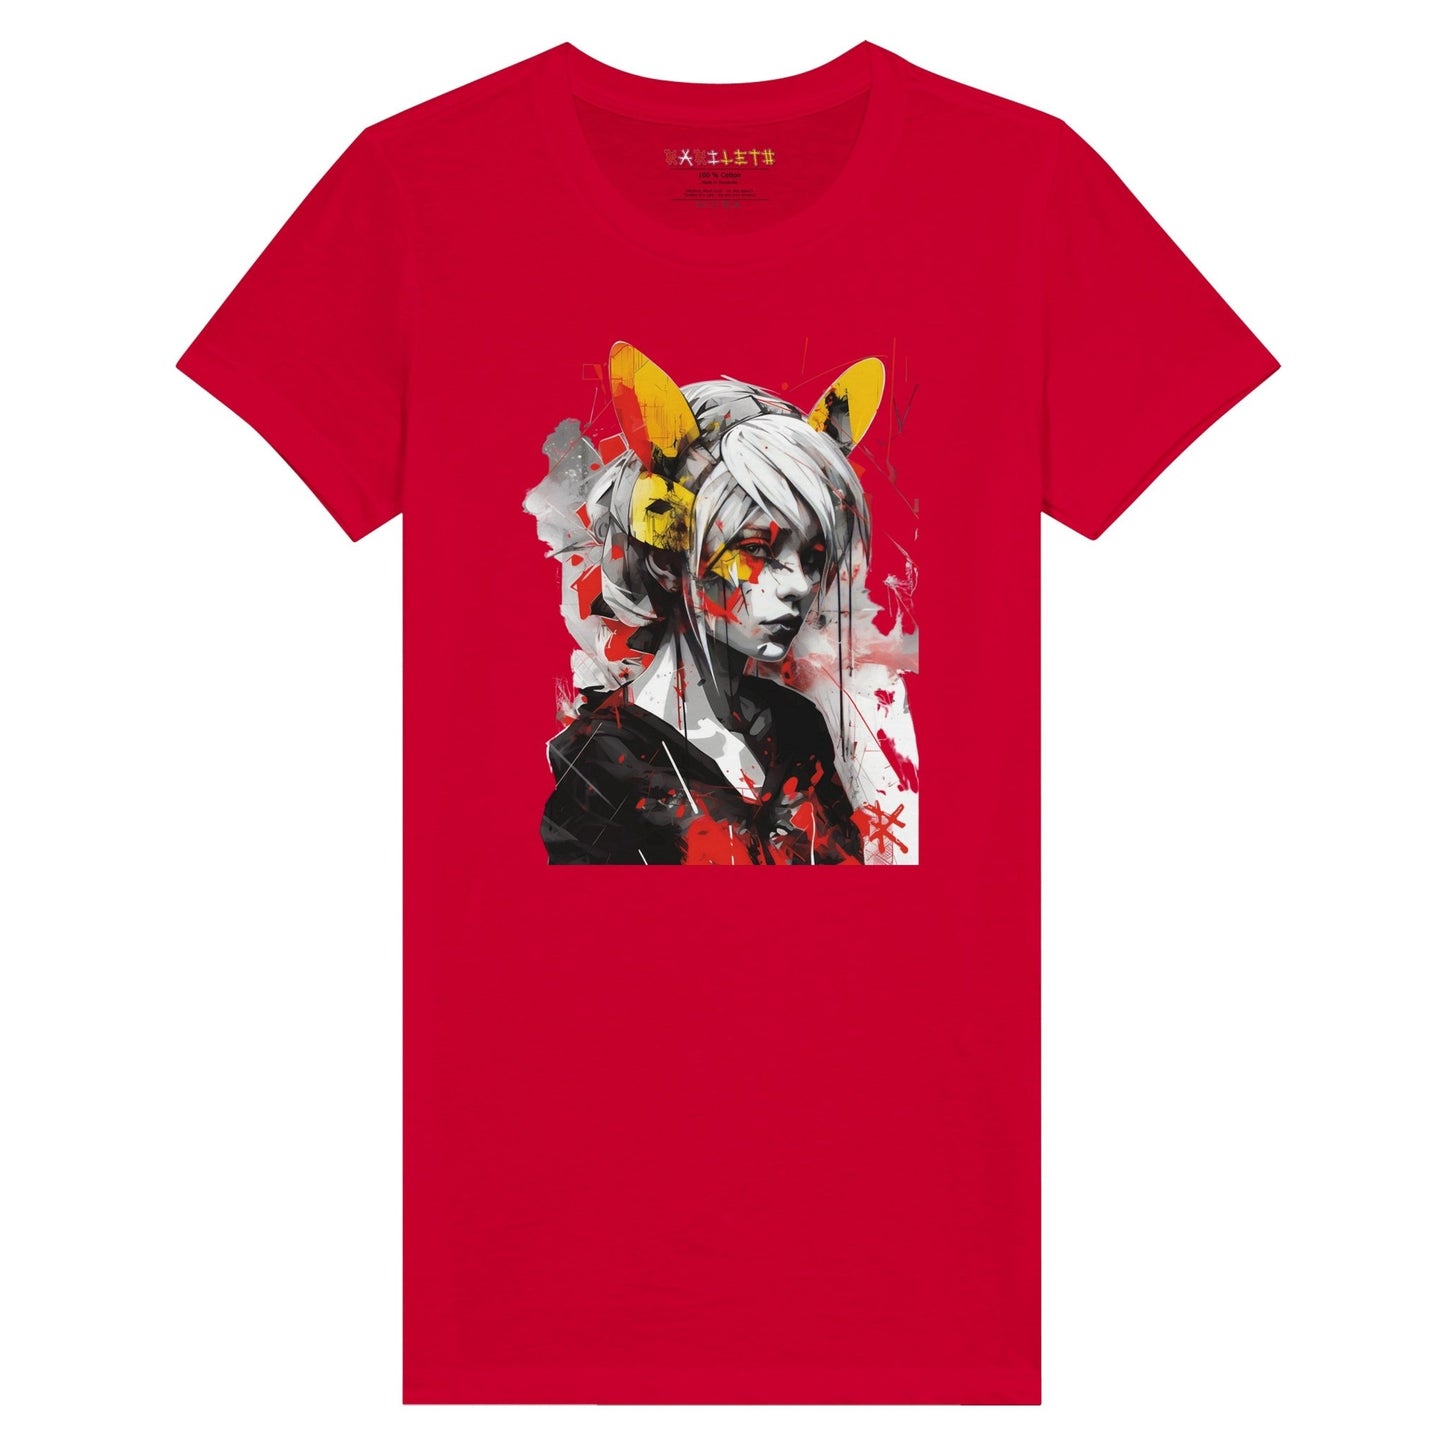 GIRL WITH CAT EARS Premium Tee - Rarileto t shirts - Red - S